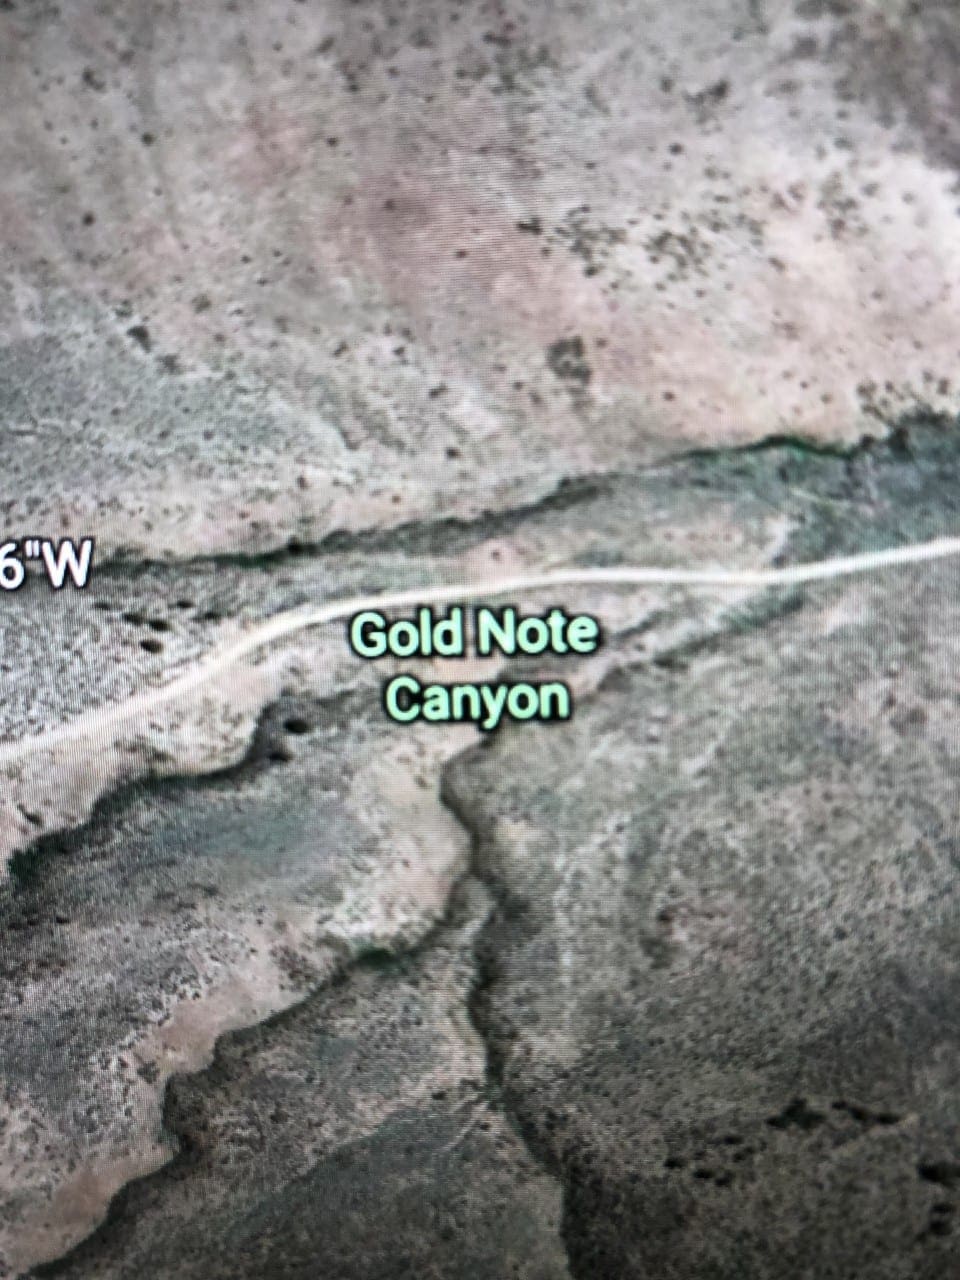 15.84 Acres in GOLD NOTE CANYON, HIDDEN TREASURE #1, SUR 2097 – A PATENTED MINING CLAIM -PAST PRODUCER OF GOLD, SILVER & ZINC photo 34